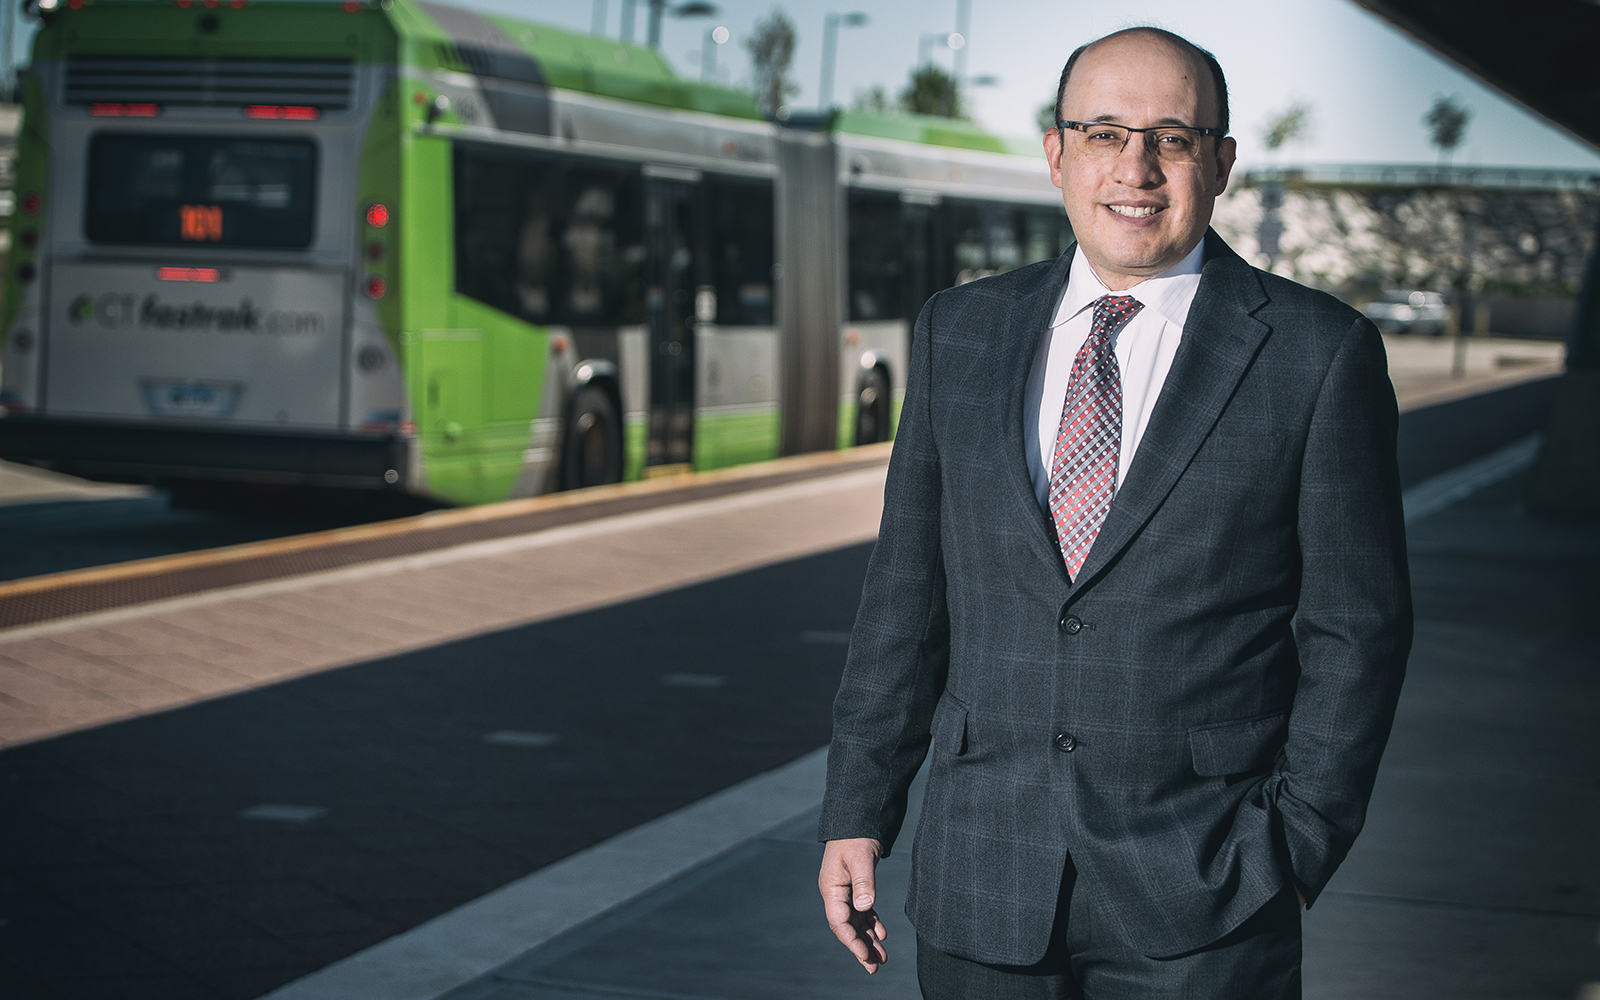 Jeffrey Cohen, who specializes in real estate and finance, has received a $194,000 grant from the state Department of Transportation to start investigating economic changes along the CTfastrak bus route. (Nathan Oldham/UConn School of Business)